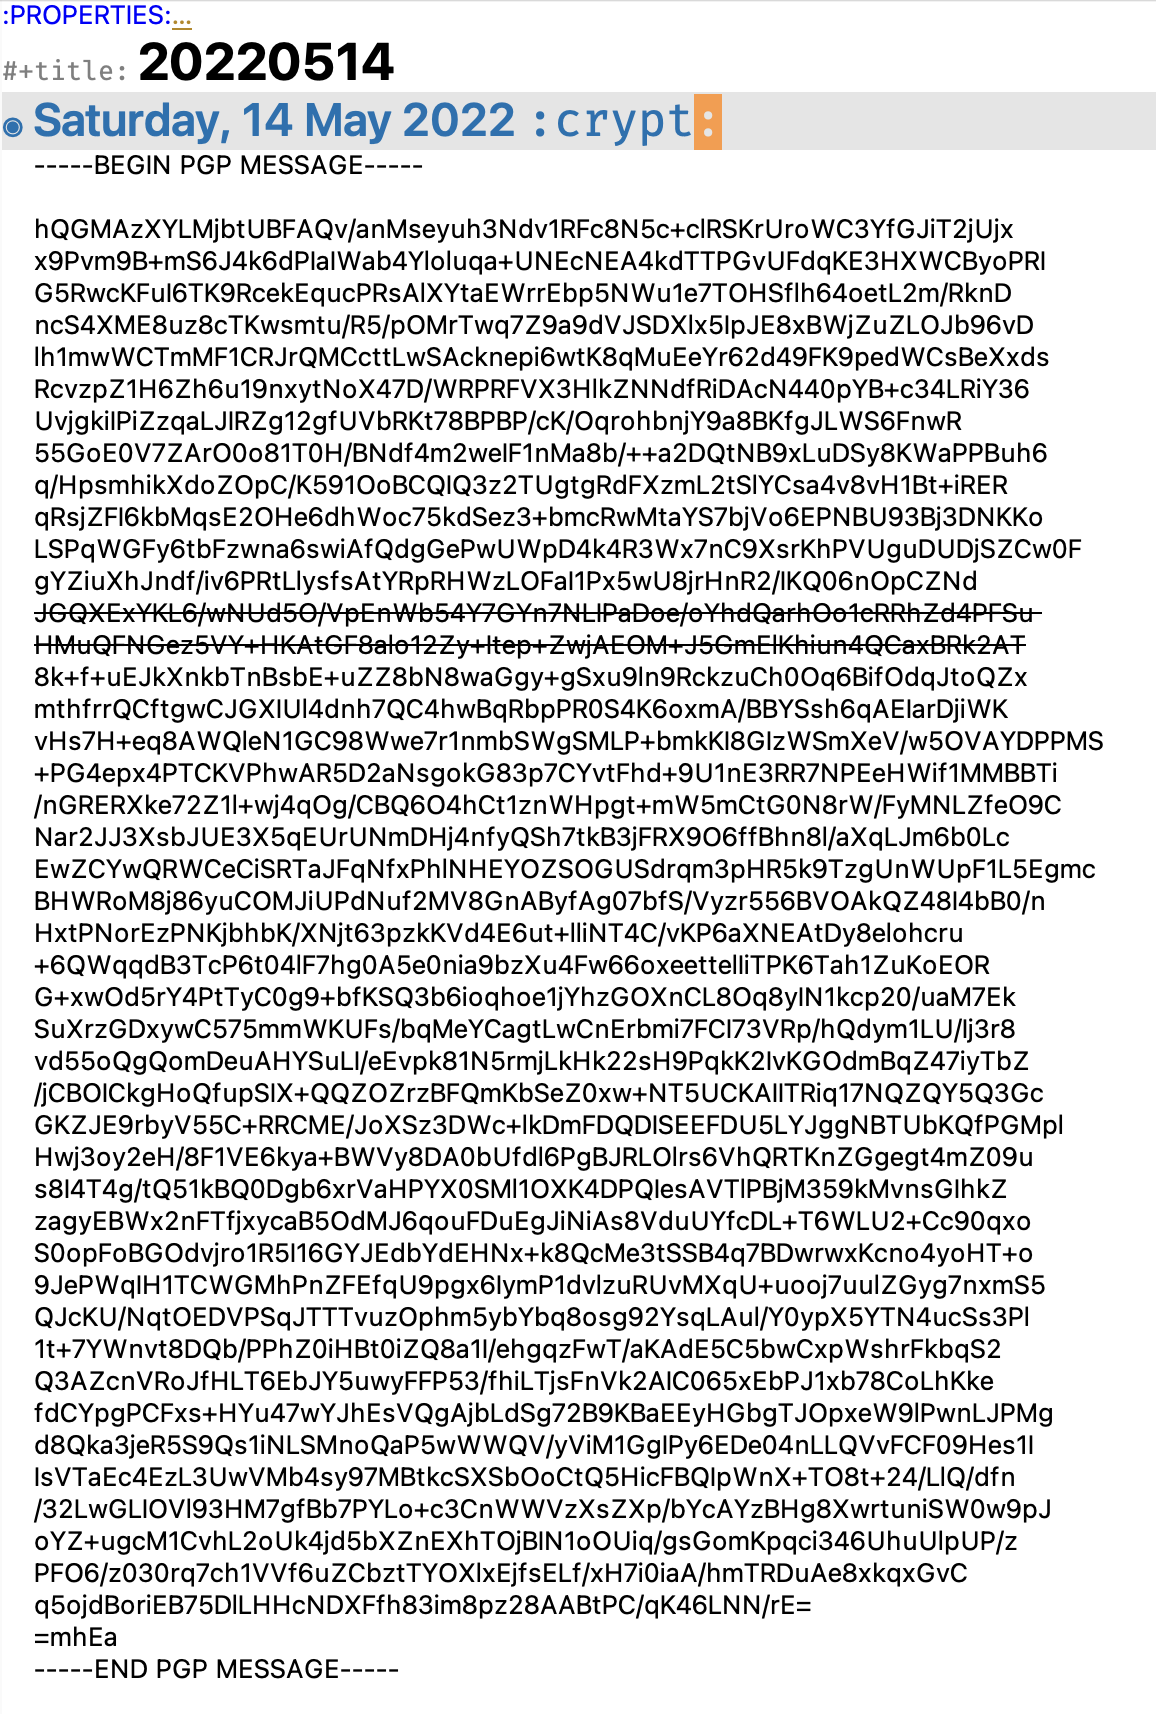 screenshot of an encrypted journal file, displayed the aforementioned striking-out behavior within the PGP text. Hey, if you figure out how to decrypt it, you can read my journal file for the day!